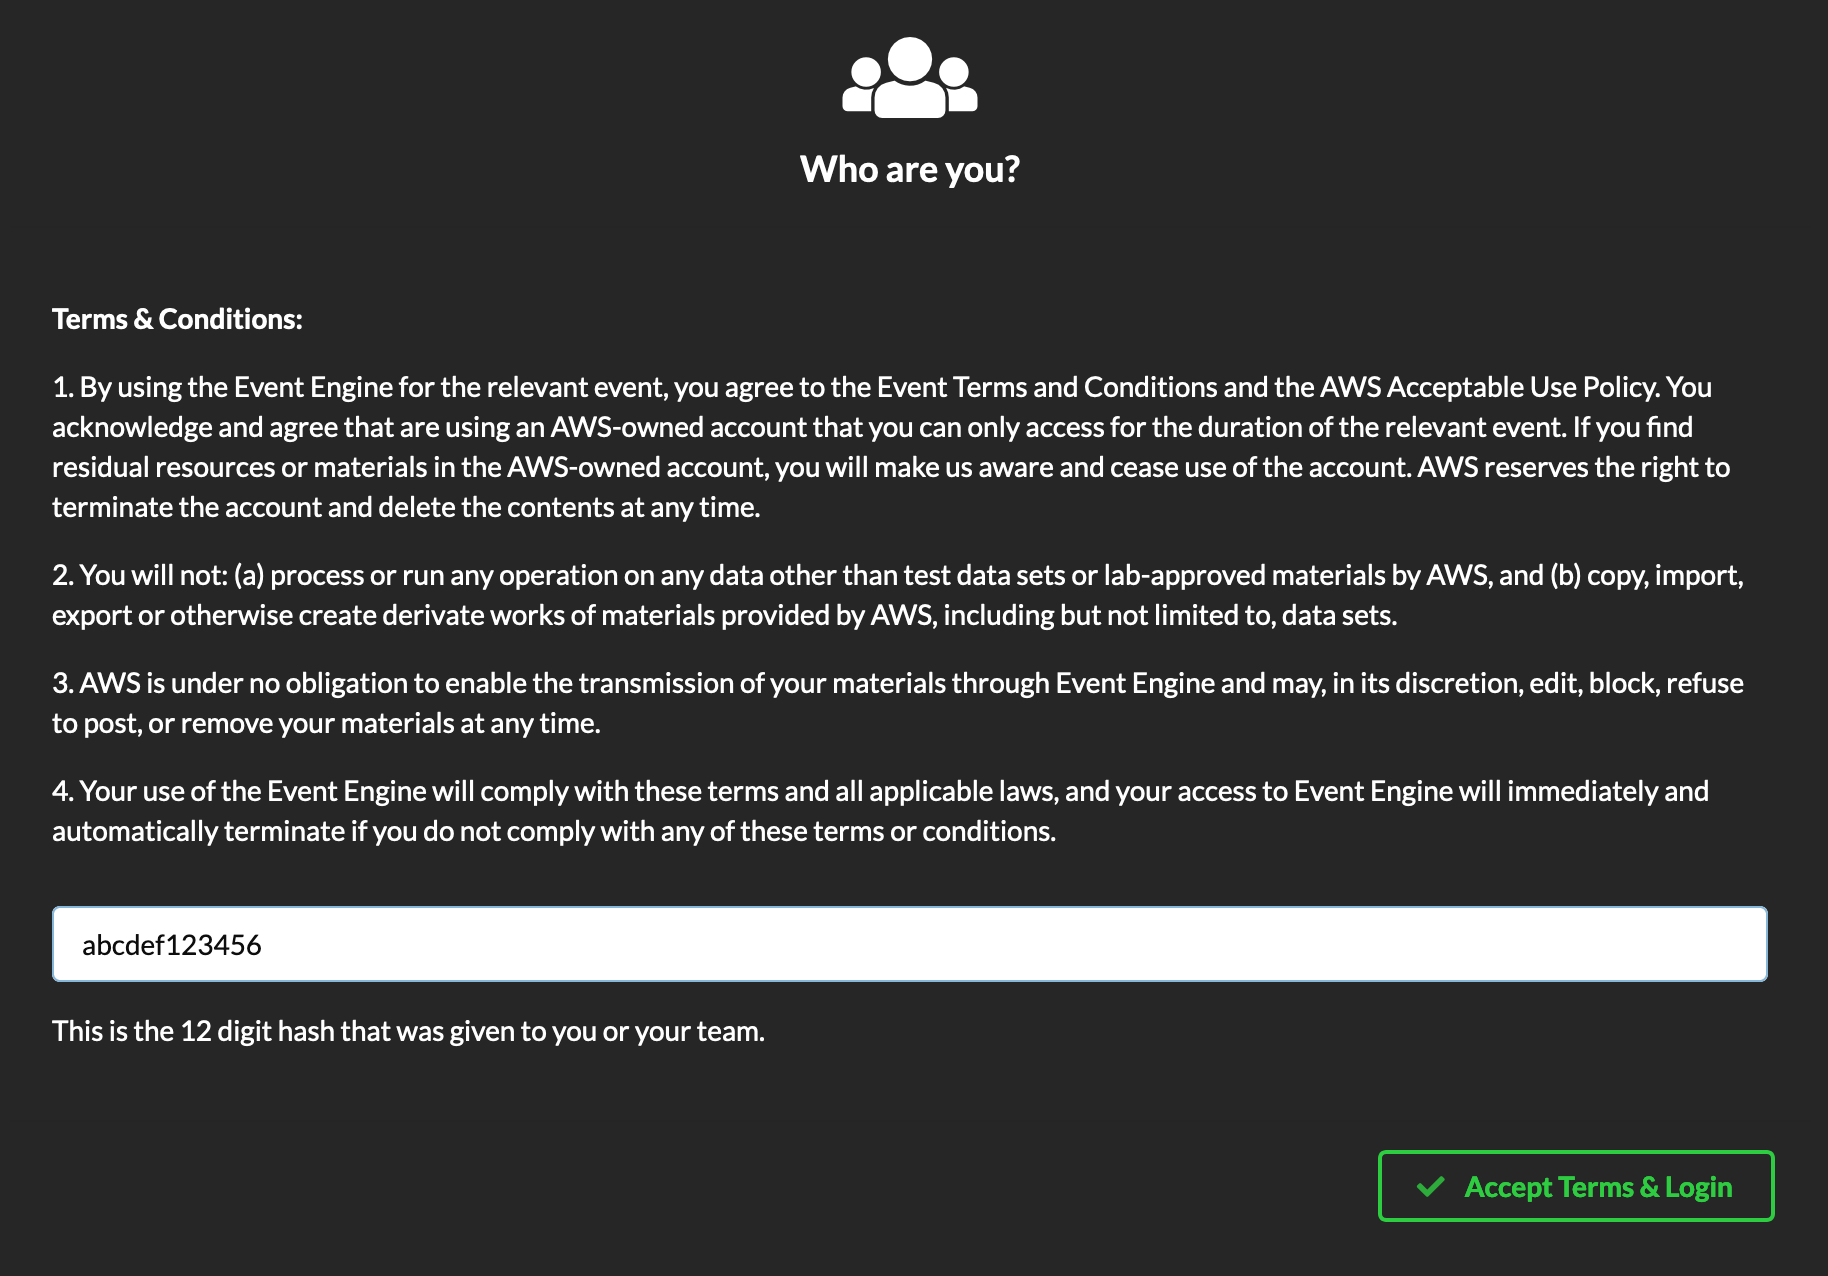 A screen capture of the Event Engine terms and conditions and login screen